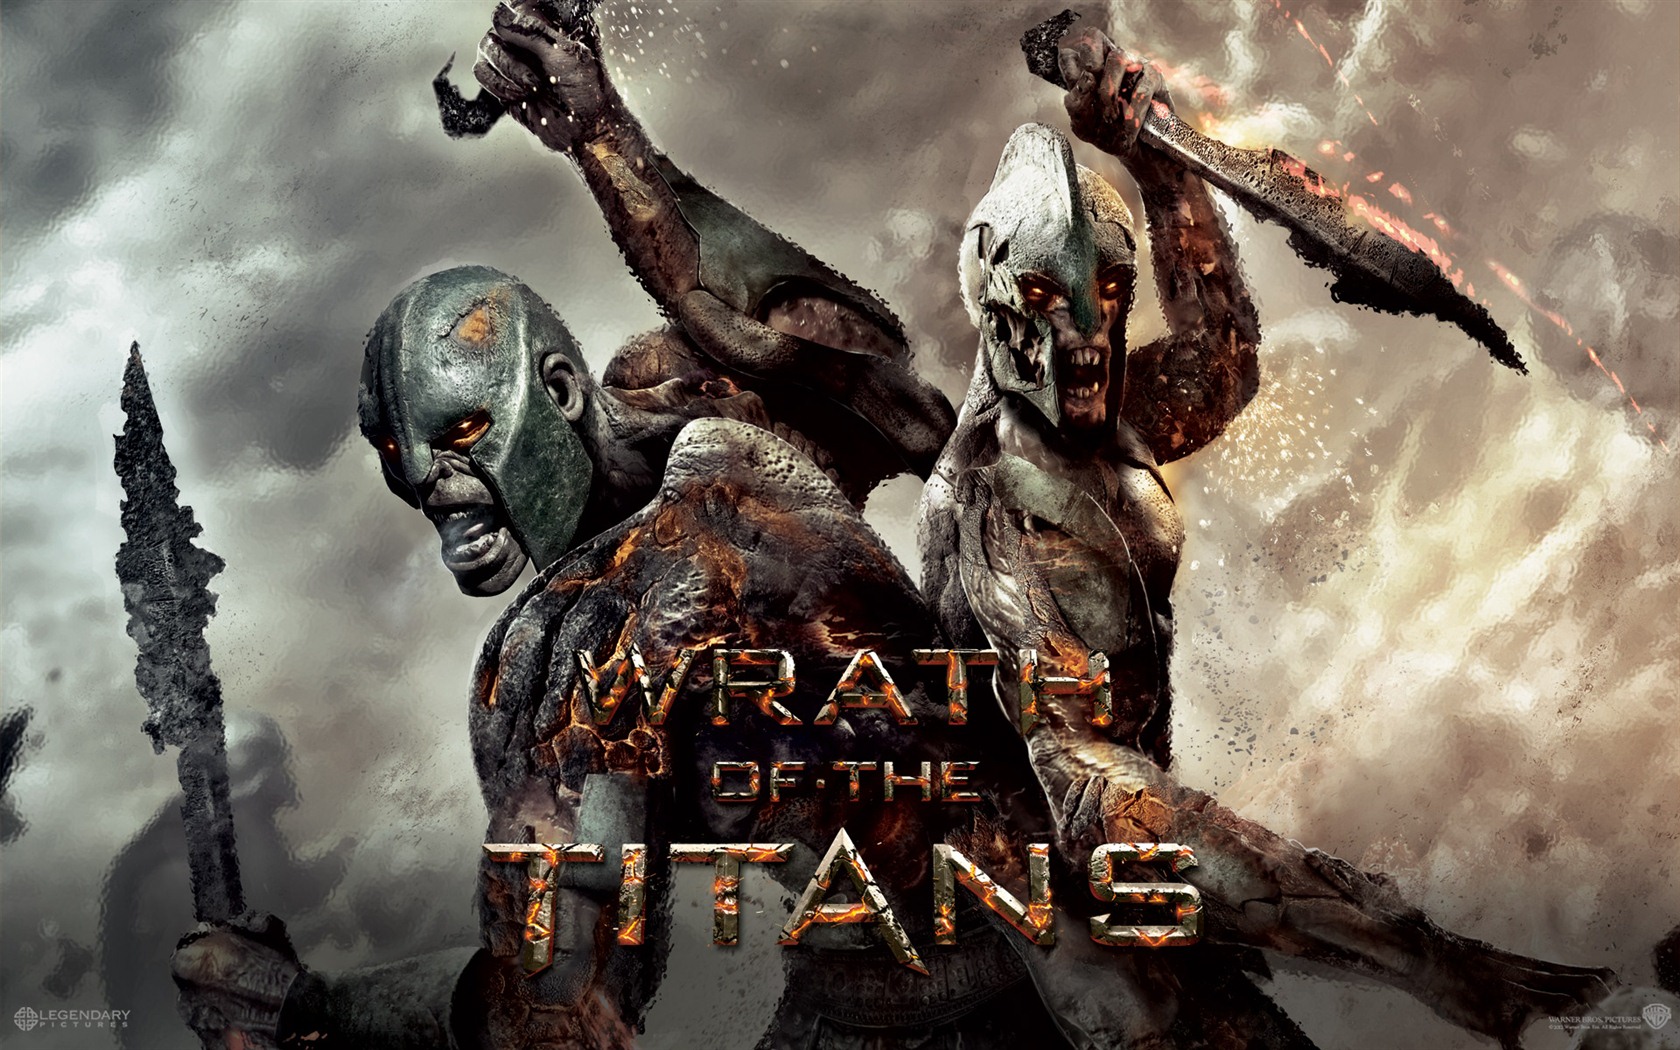 Wrath of the Titans HD Wallpapers #6 - 1680x1050